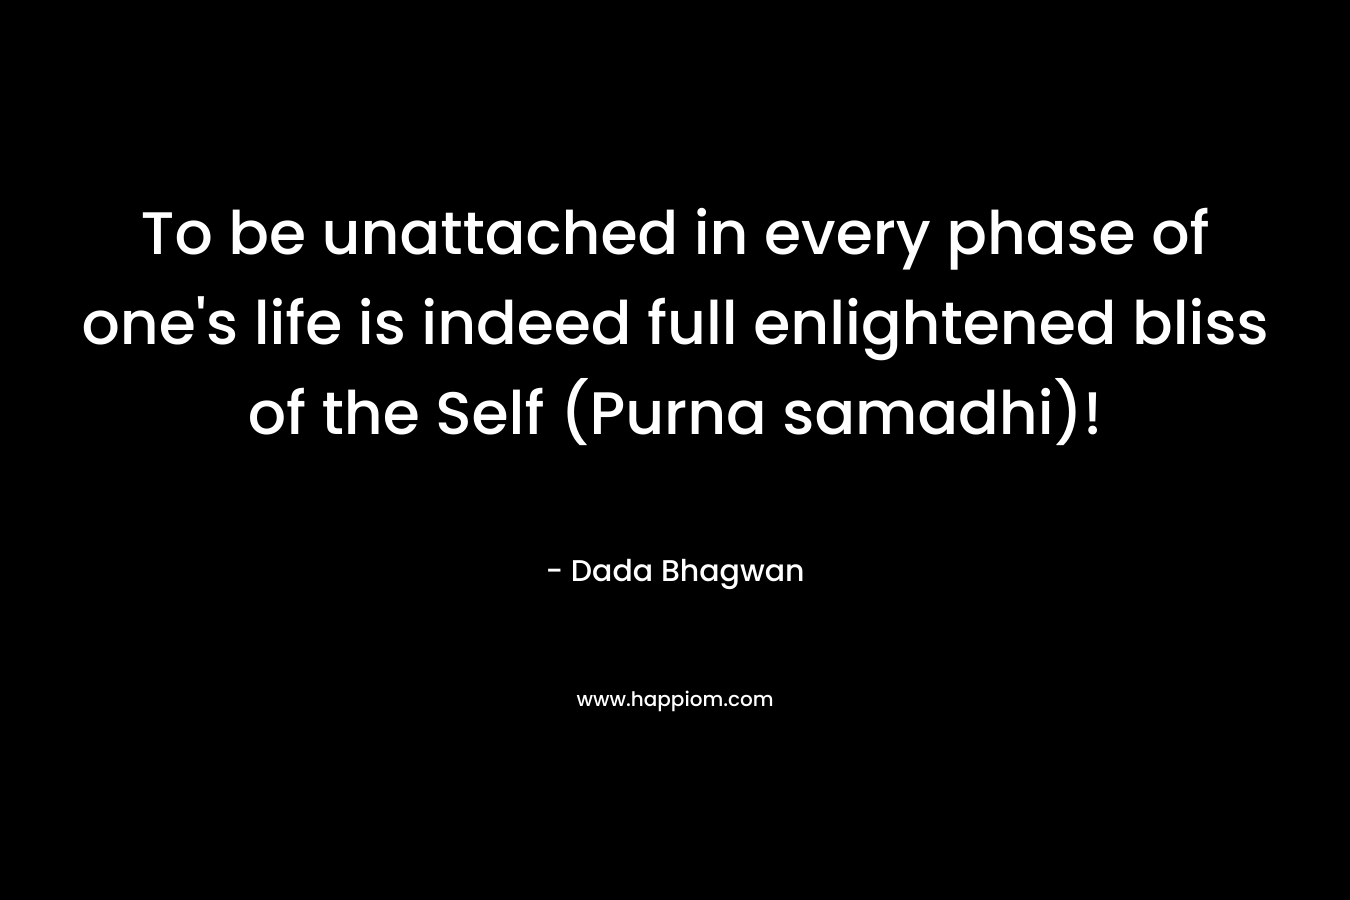 To be unattached in every phase of one’s life is indeed full enlightened bliss of the Self (Purna samadhi)! – Dada Bhagwan